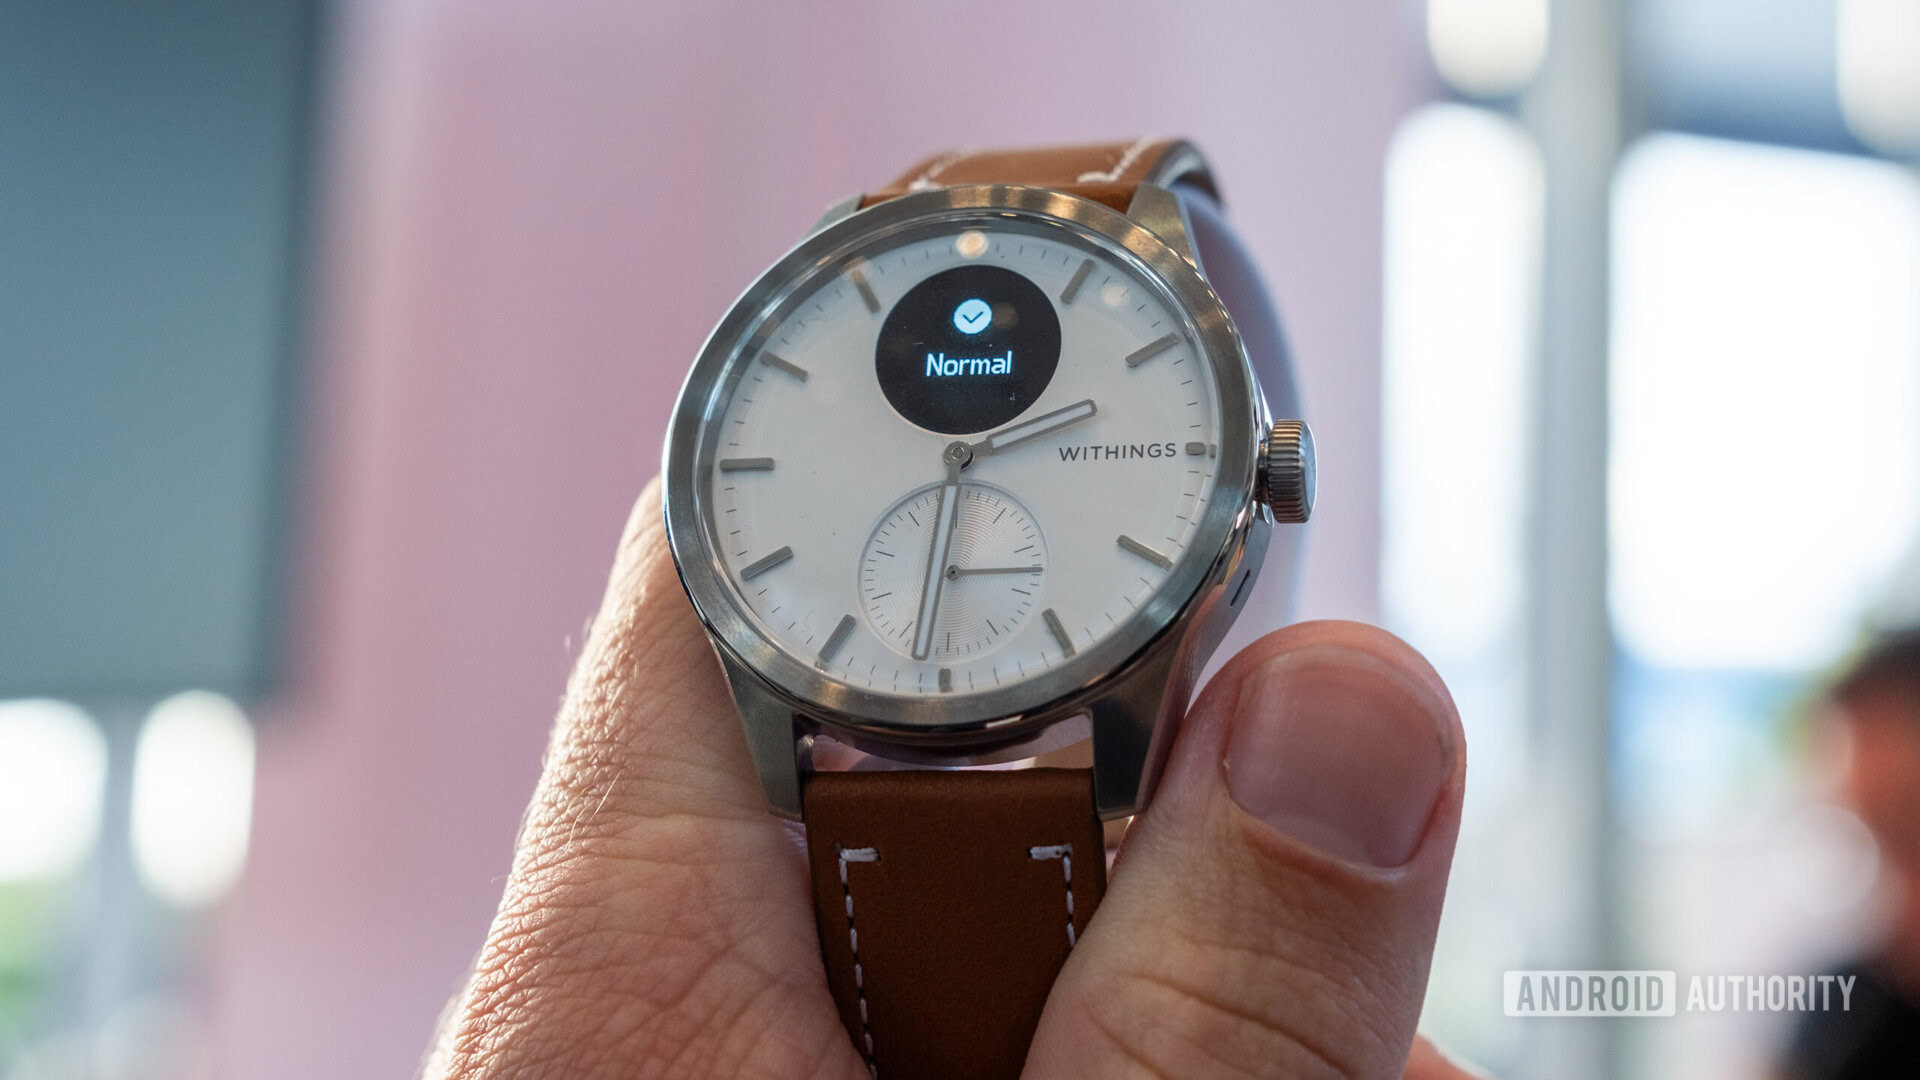 Withings ScanWatch 2: Unboxing and first look - YouTube